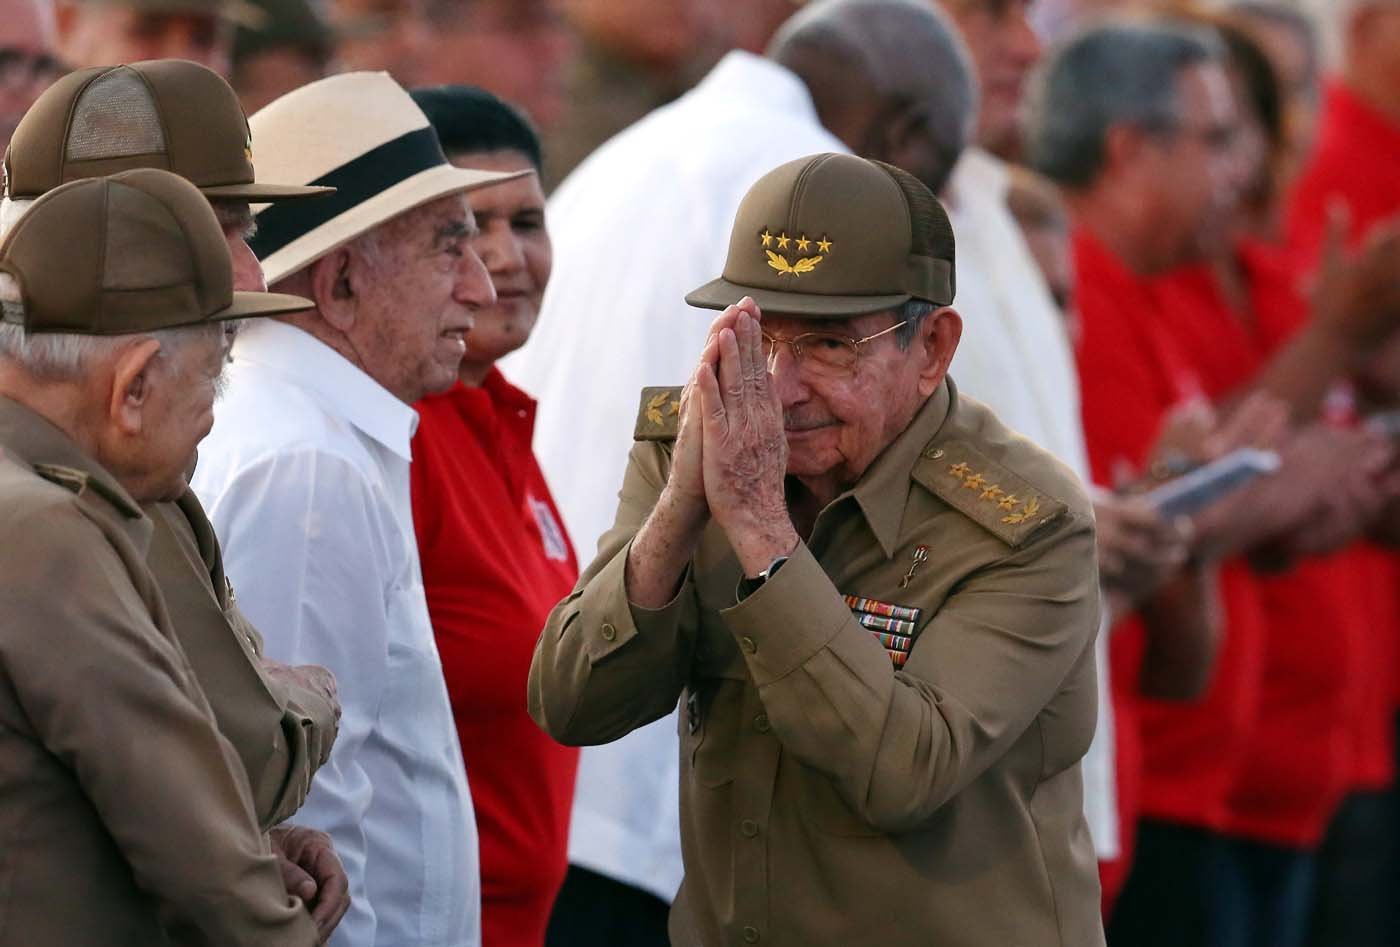  Raul Castro gestures as he arrives for the ceremony marking the 64th anniversary of the July 26, 1953 rebel assault which former Cuban leader Fidel Castro led on the Moncada army barracks, Pinar del Rio, Cuba, July 26, 2017. REUTERS/Alejandro Ernesto/Pool